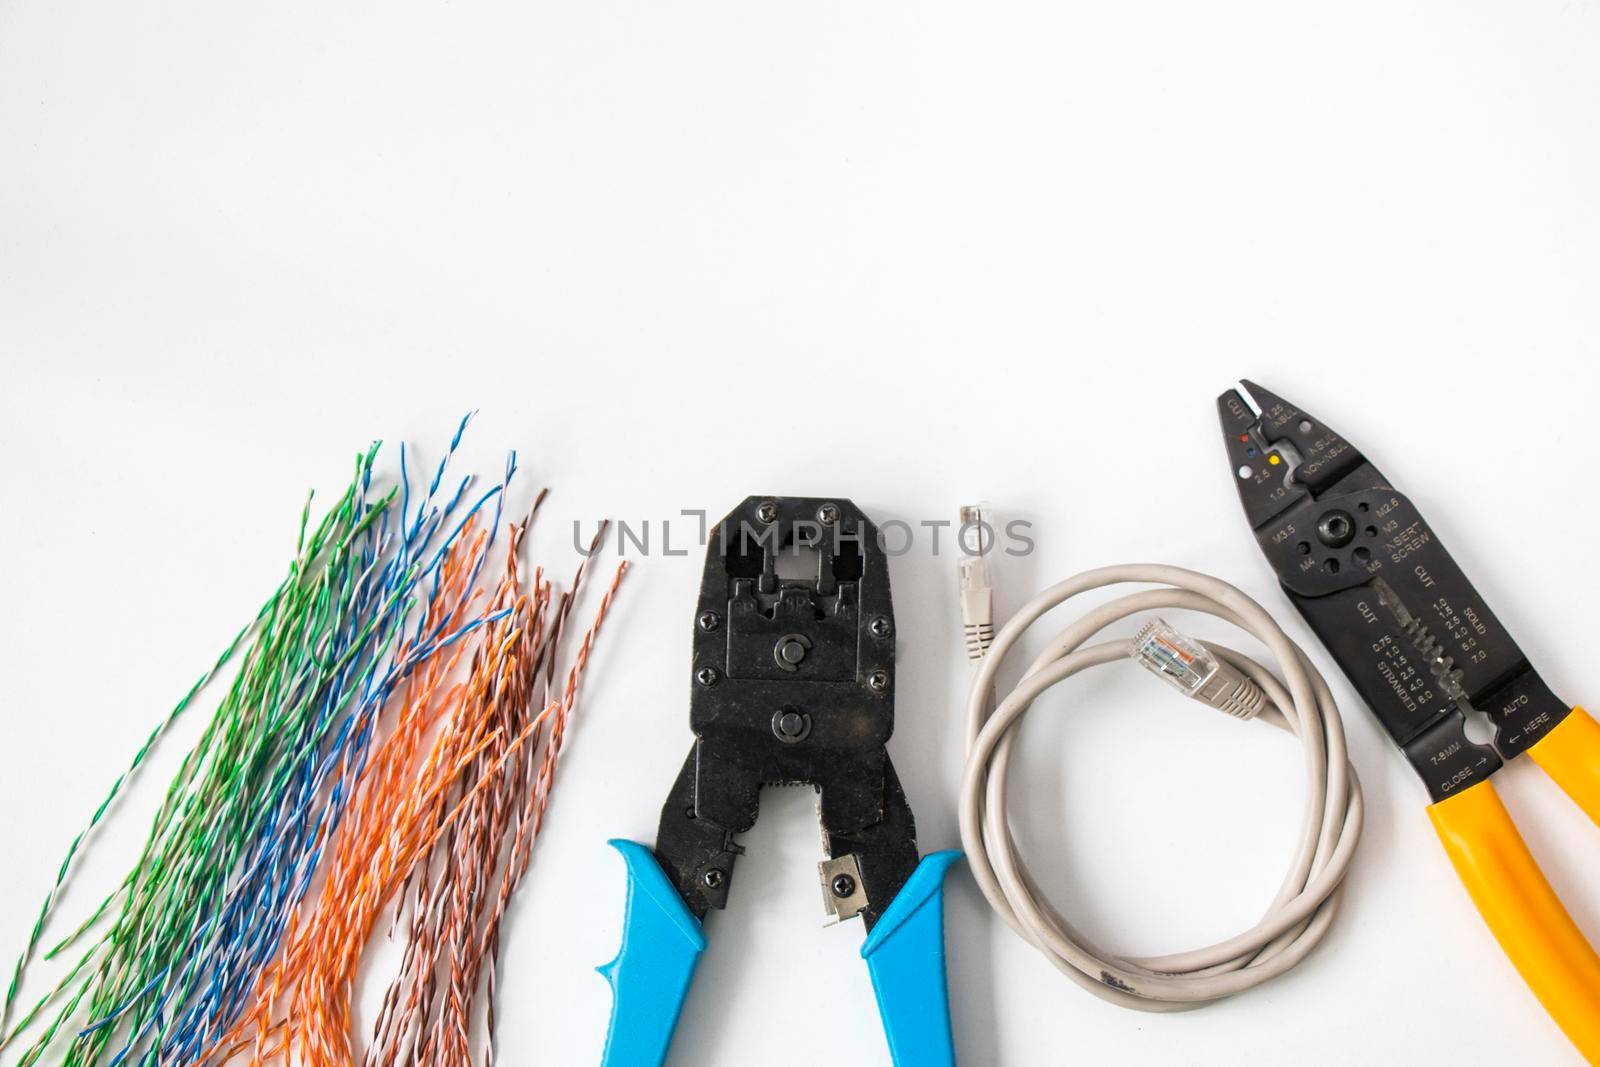 Internet cable and tools on the white background, high angle view